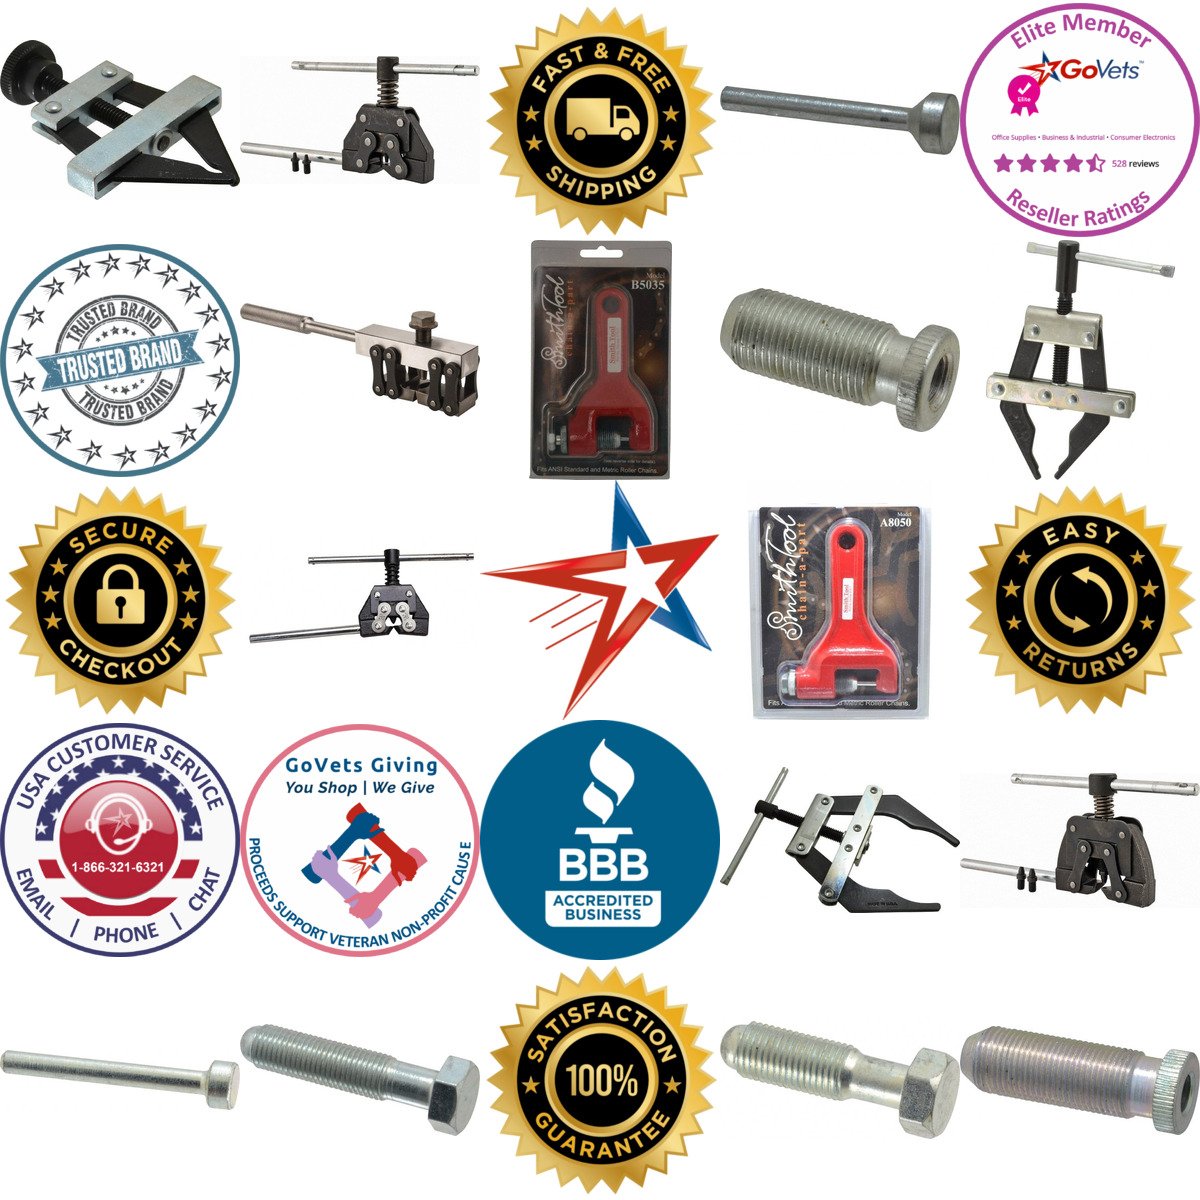 A selection of Chain Breakers Pullers and Parts products on GoVets